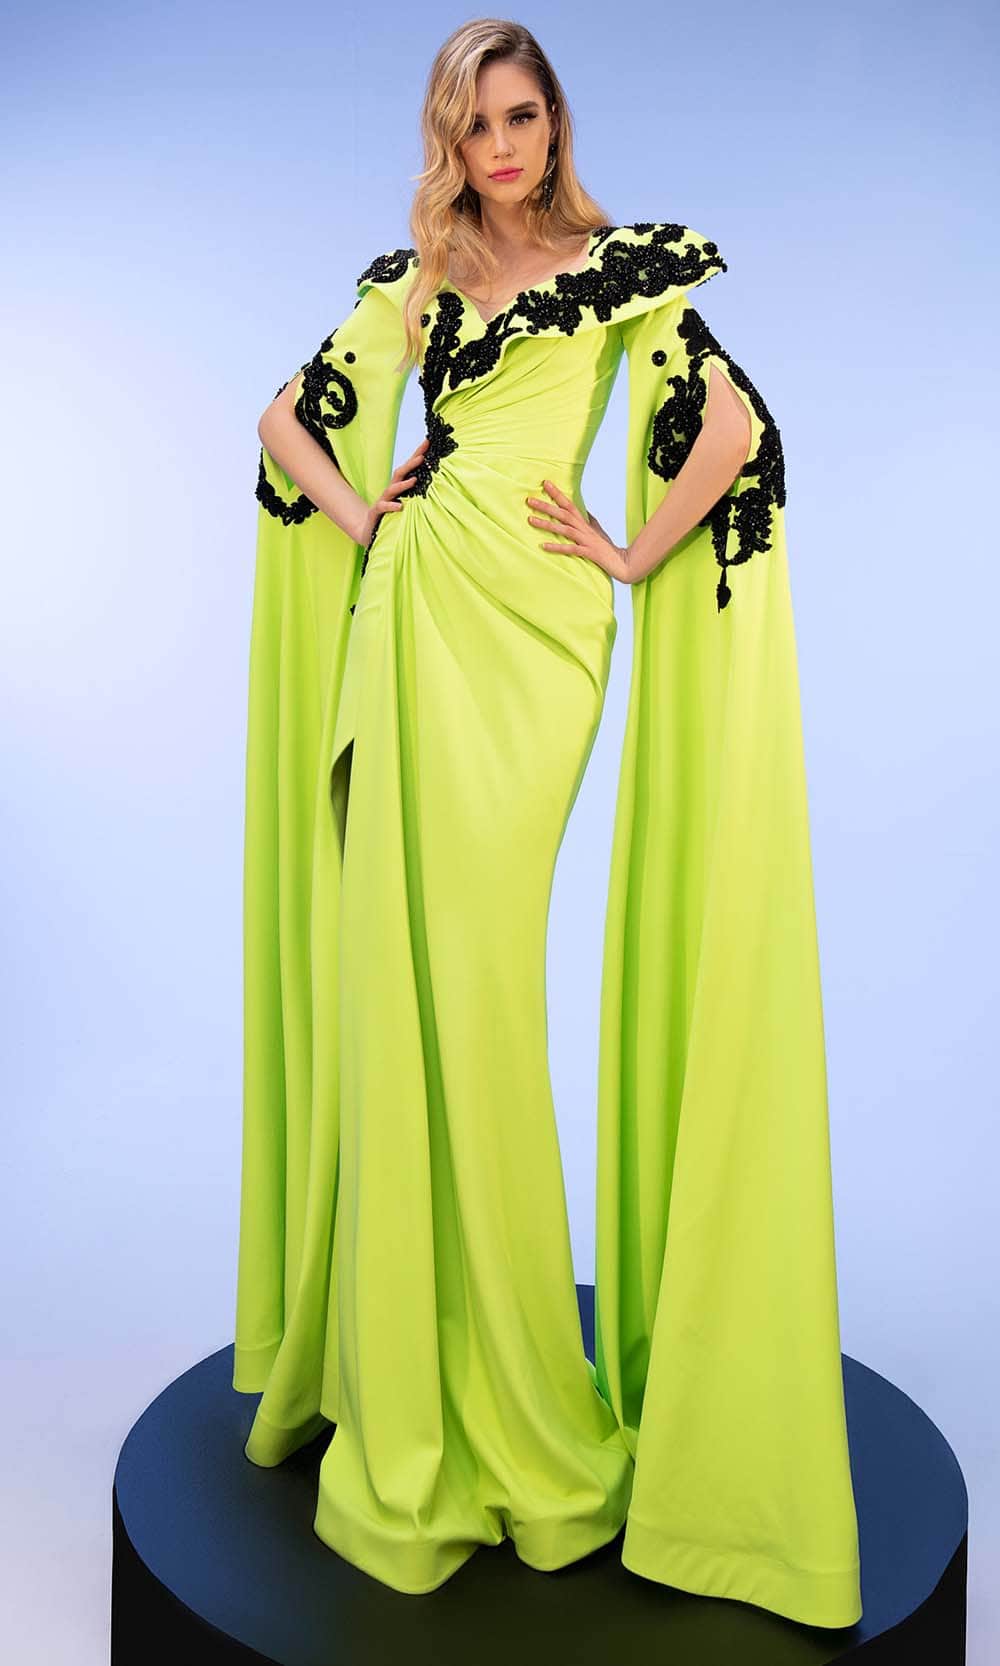 MNM Couture F02802 - Cape Sleeve Sheath Evening Gown
